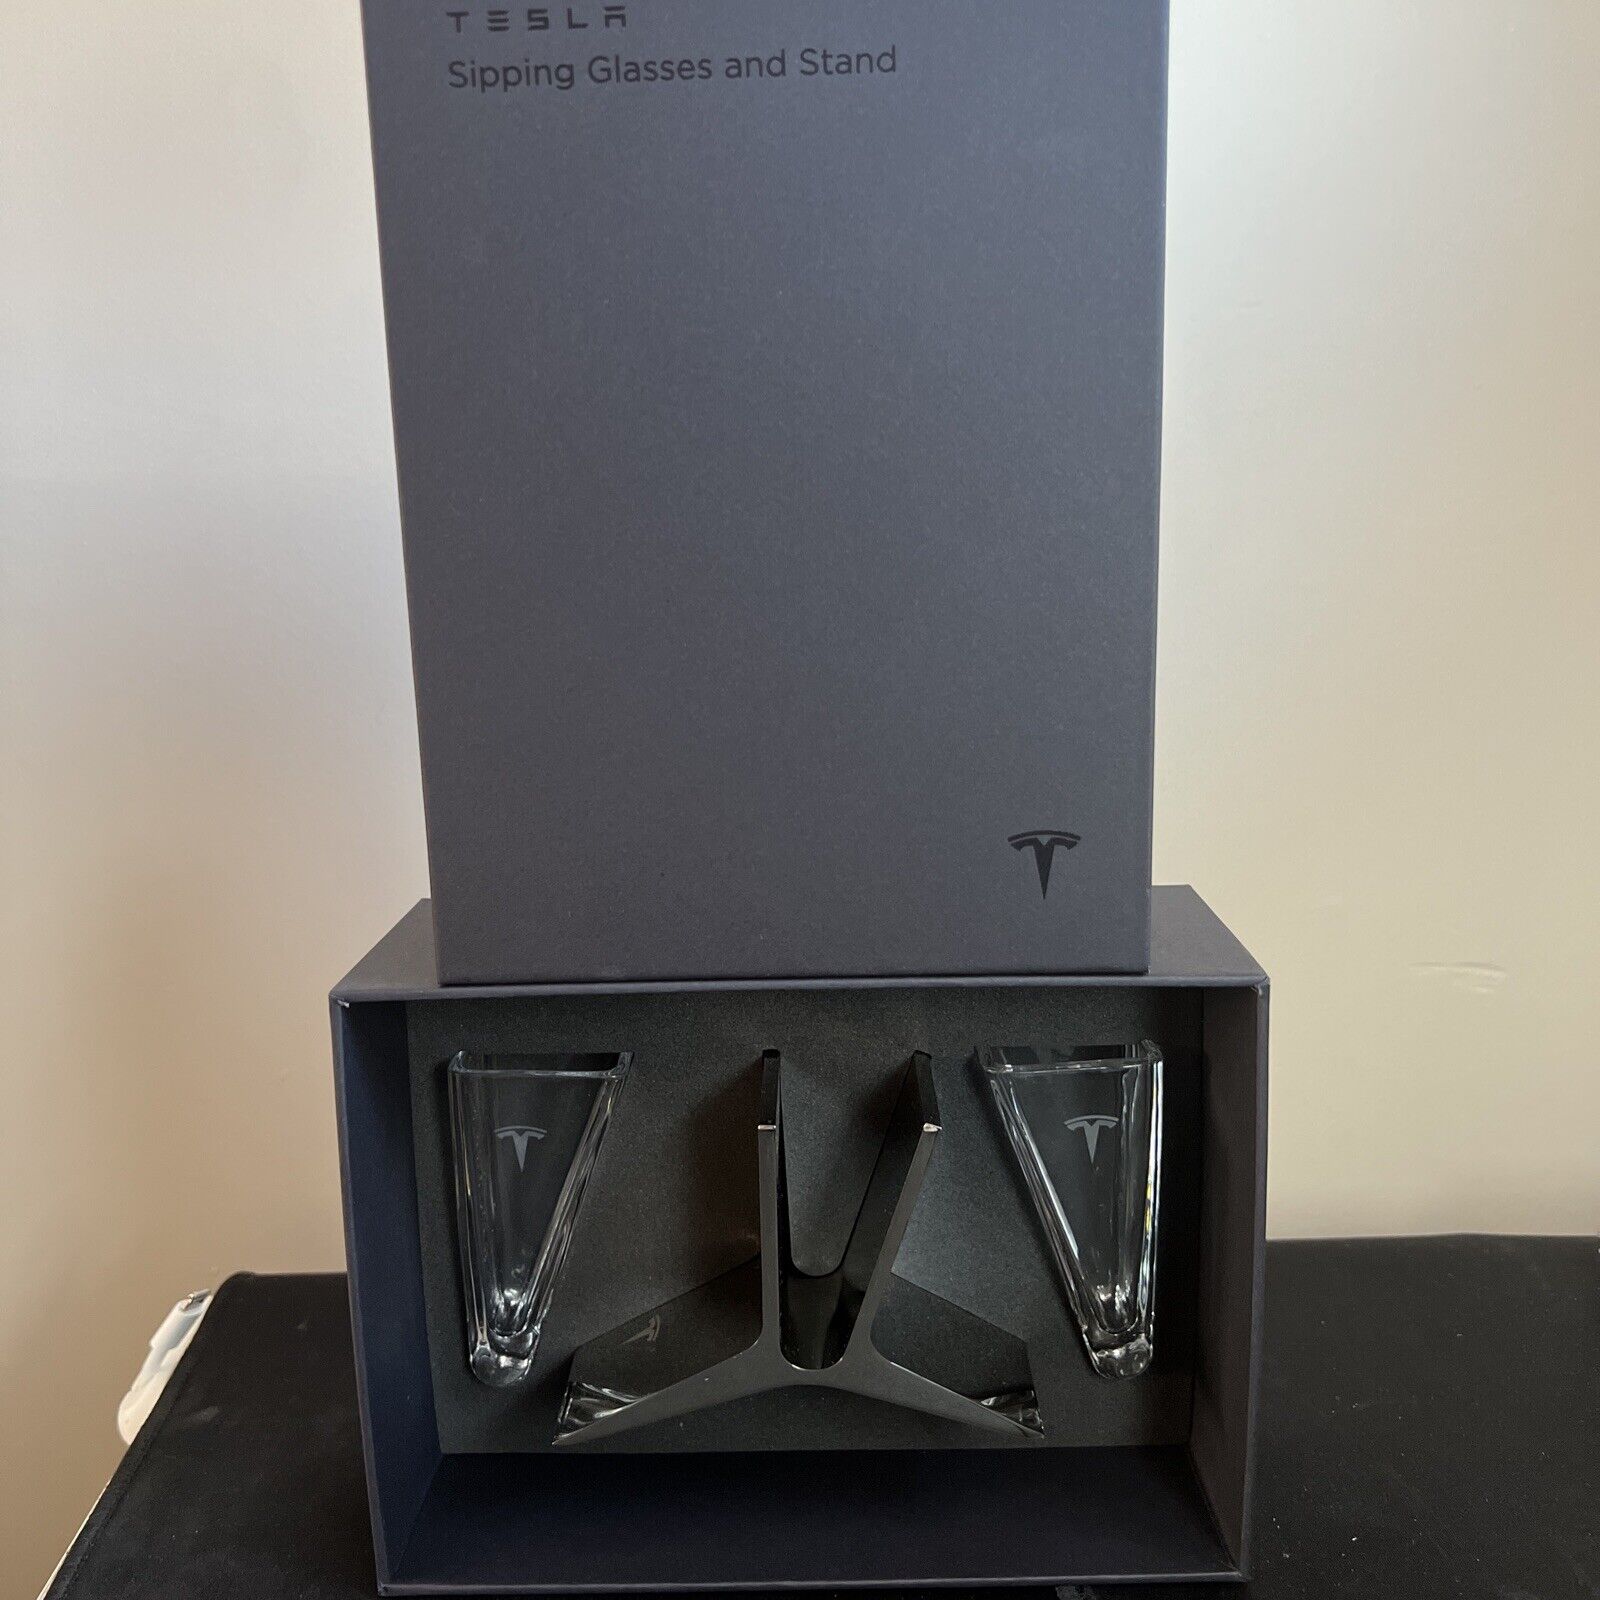 Tesla Sipping Glass-LIMITED EDITION Luxury Sipping Glasses W/ Tesla Holder NEW